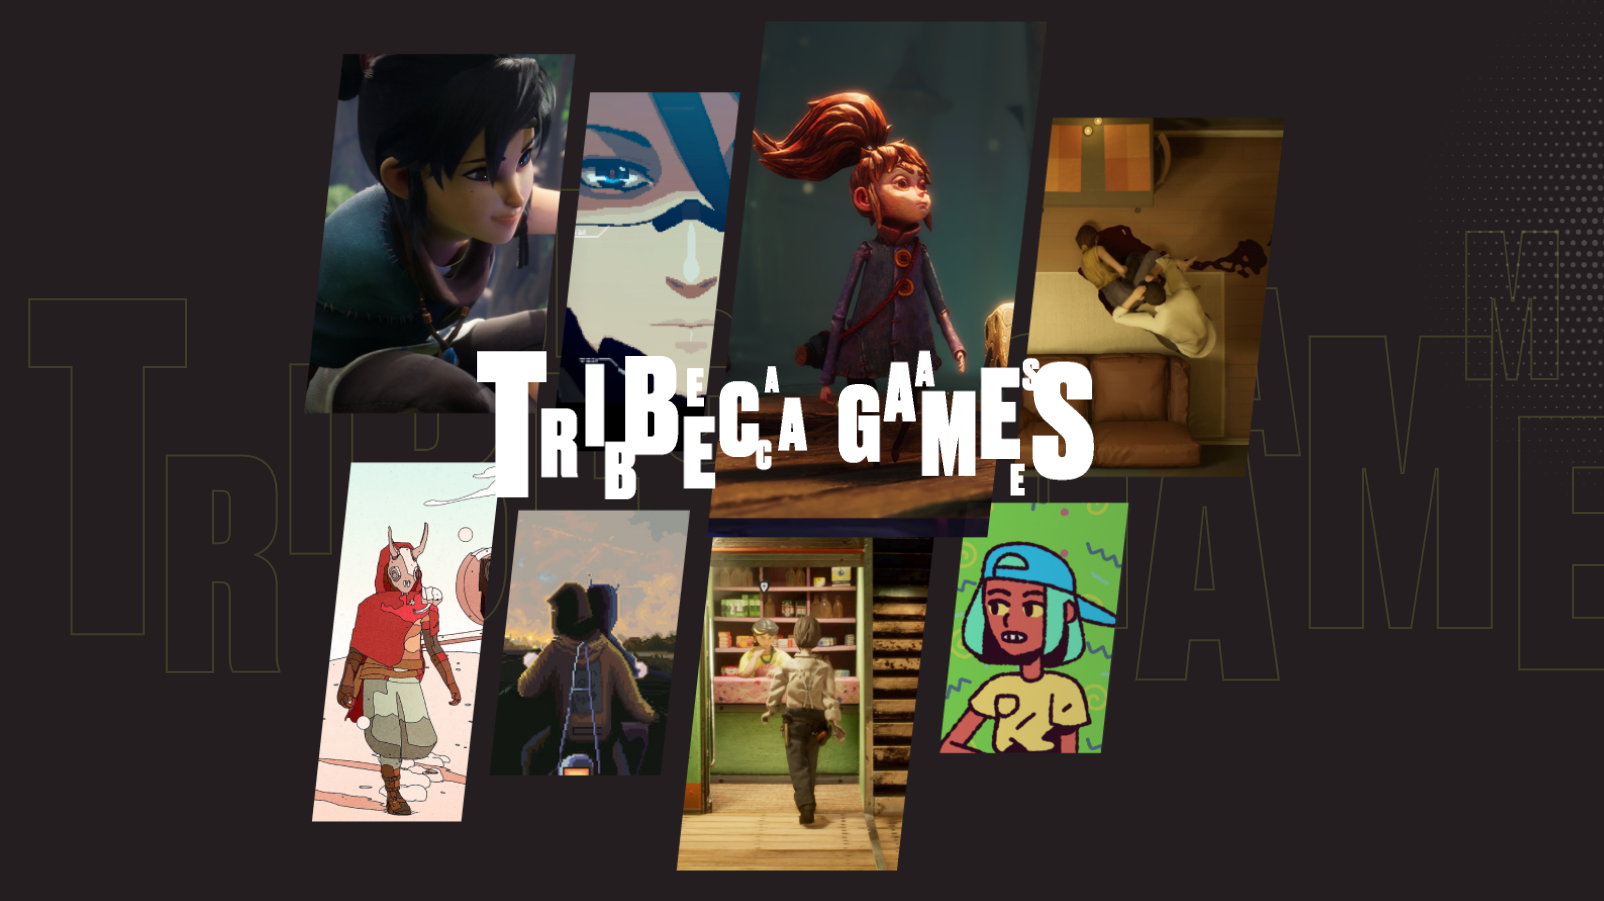 Collage of assorted thumbnails of different videos displaced behind large text on a solid gray background that says, "Tribeca Games".